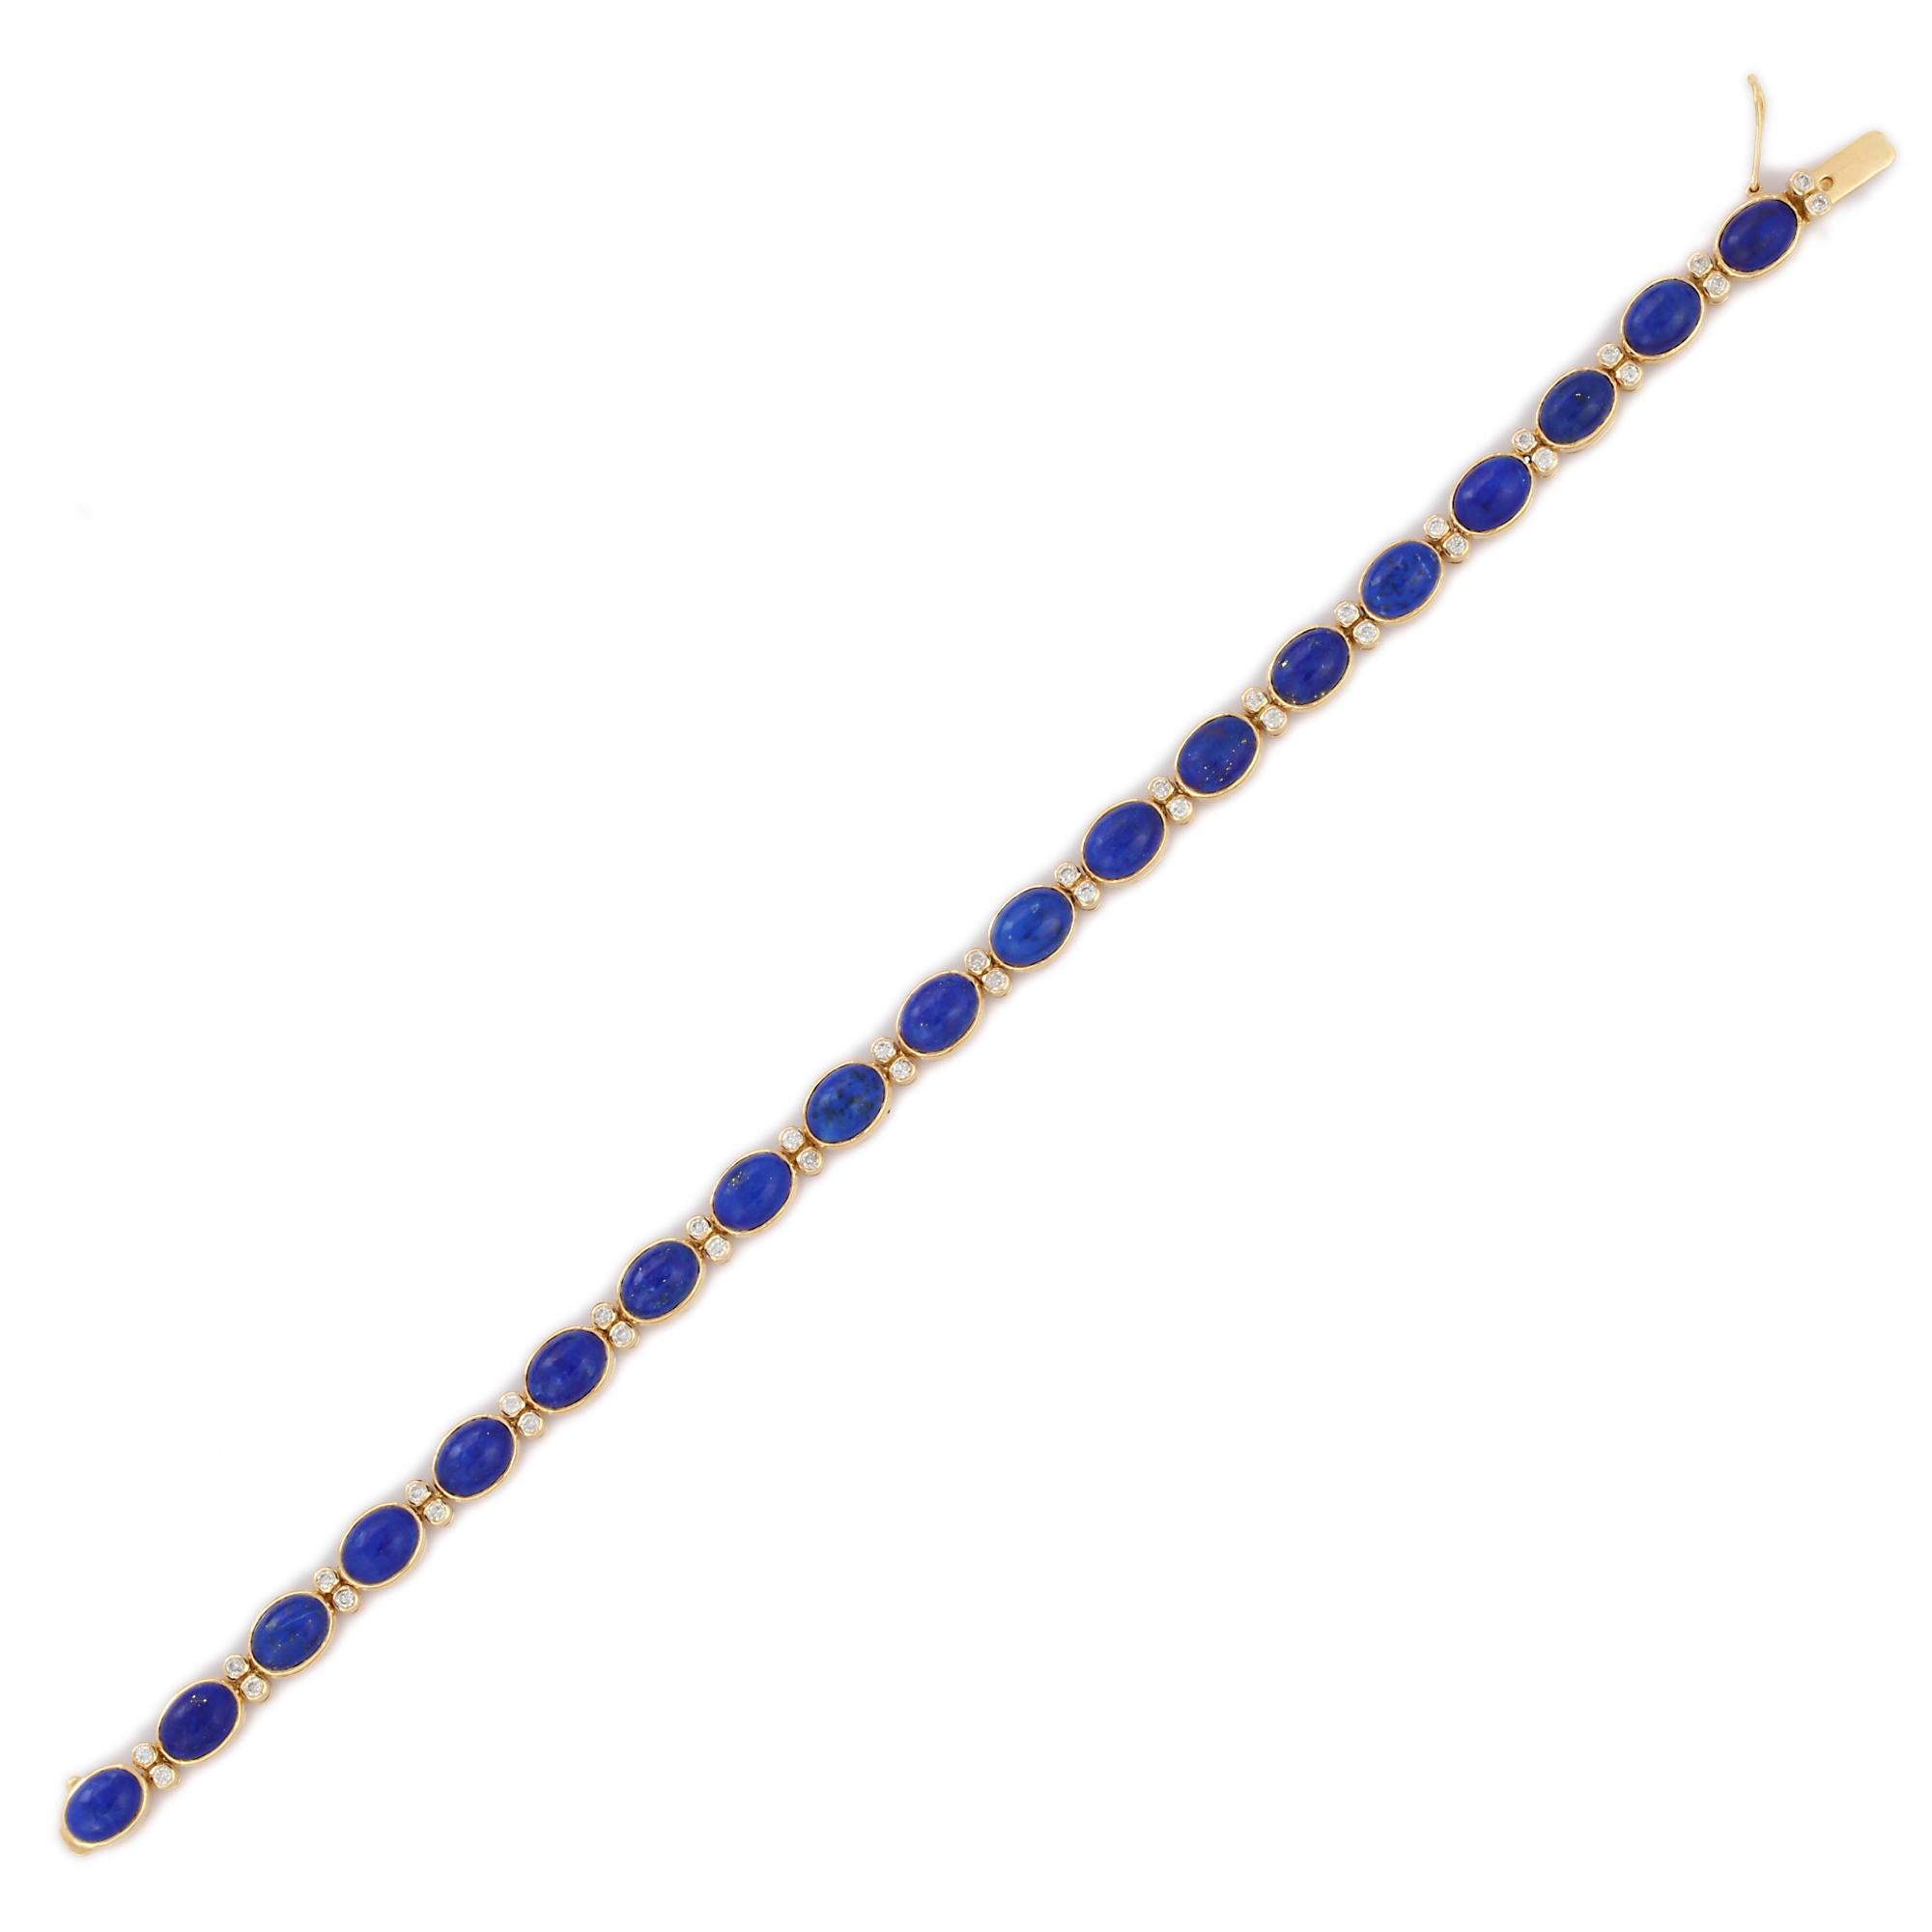 Contemporary Oval Cut 17.45 Ct Lapis and Diamond Tennis Bracelet in 18K Yellow Gold For Sale